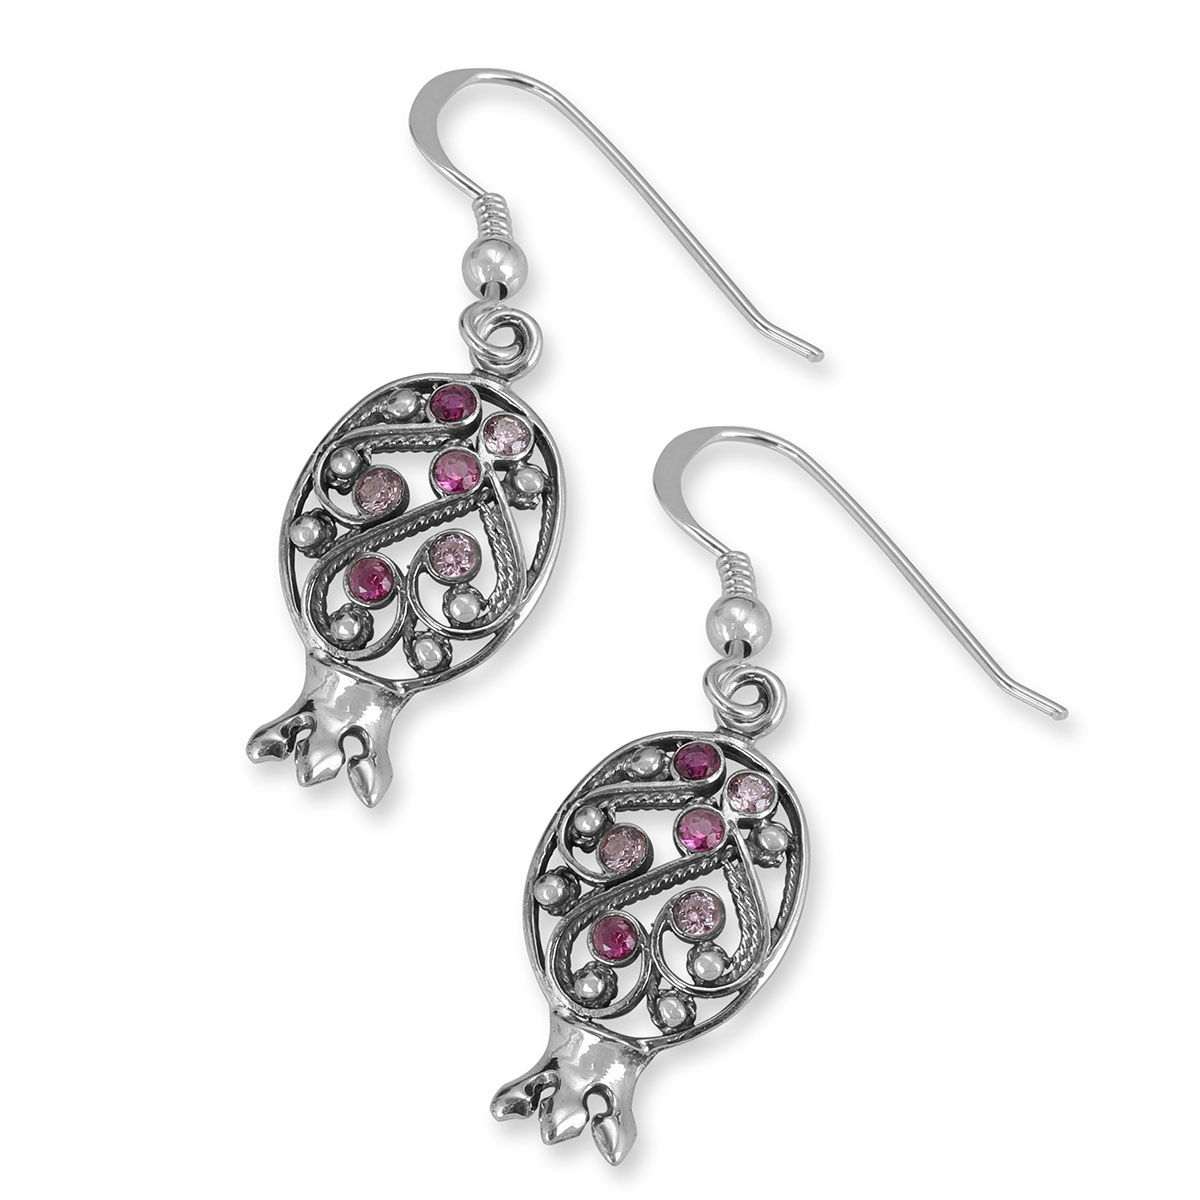 925 Sterling Silver Pomegranate Earrings With Filigree Design and Gemstones - 1